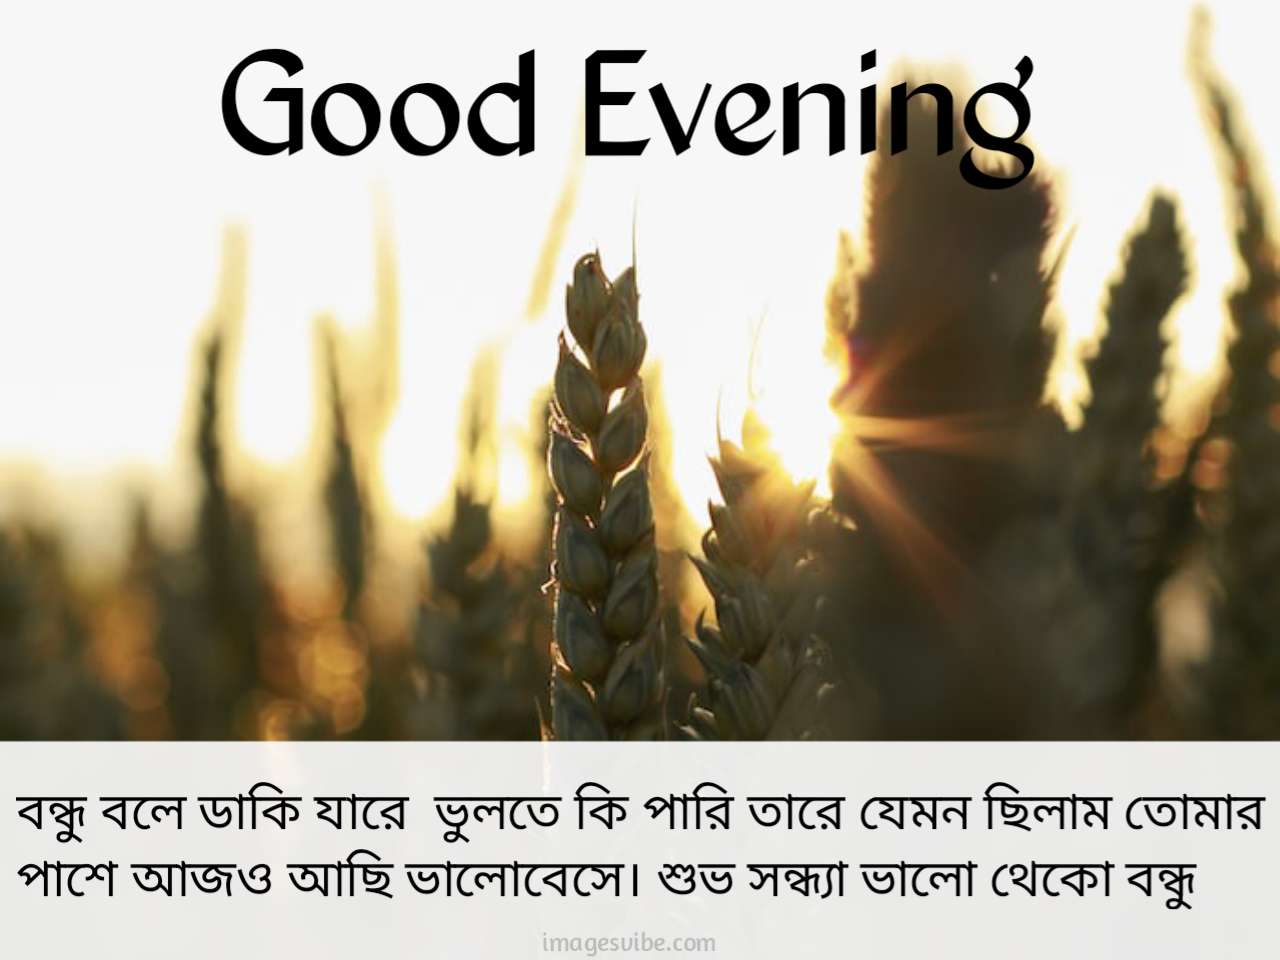 Beautiful Good Evening Bengali Images & Quotes in 2023 - Images Vibe